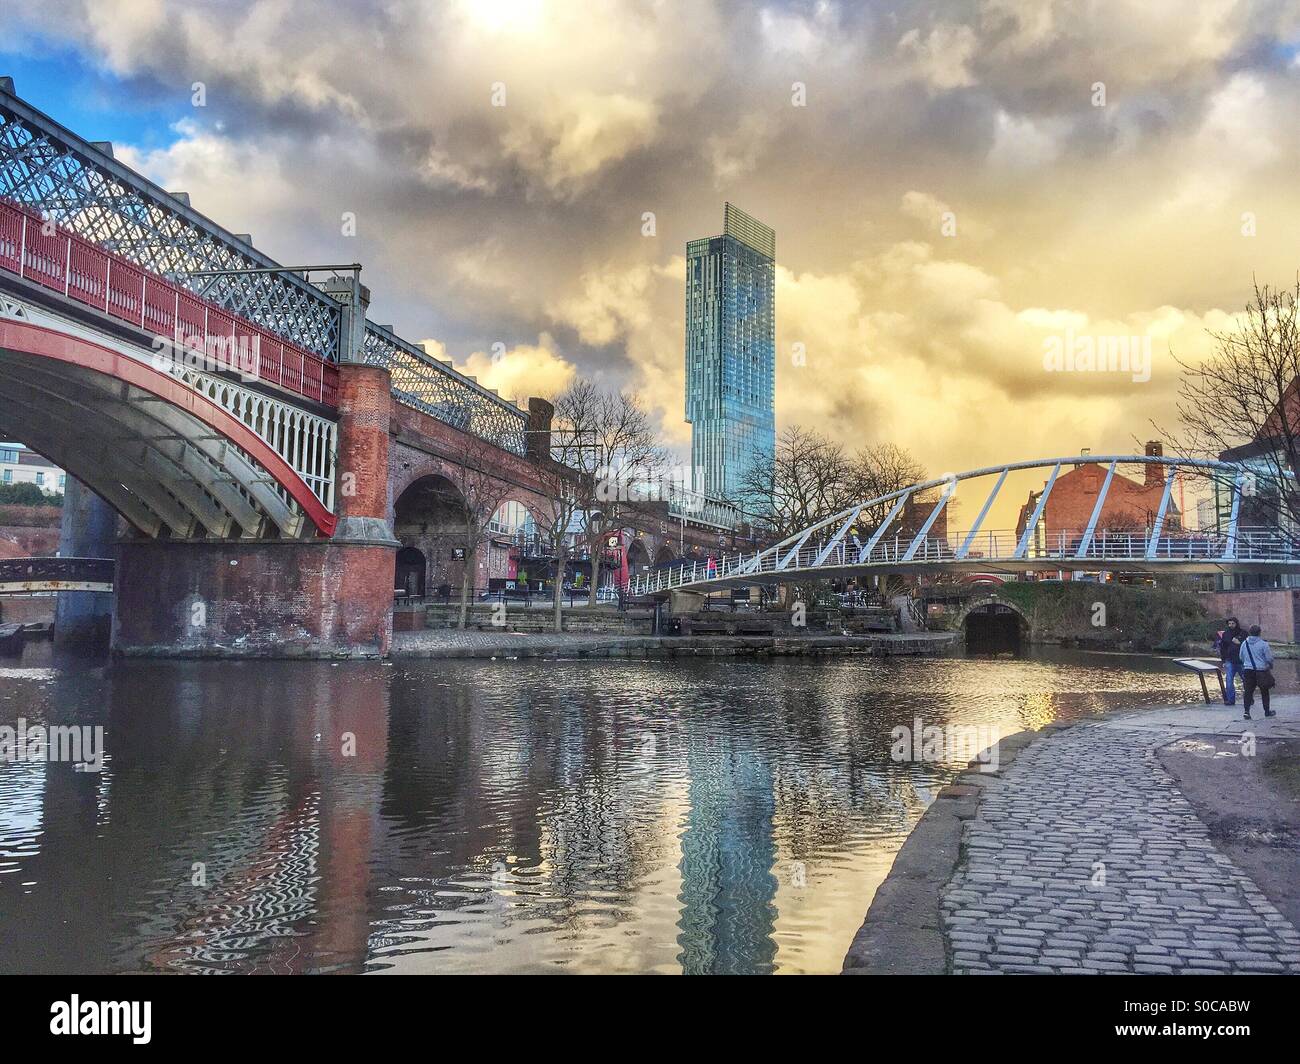 Castlefield canal, Manchester Foto Stock